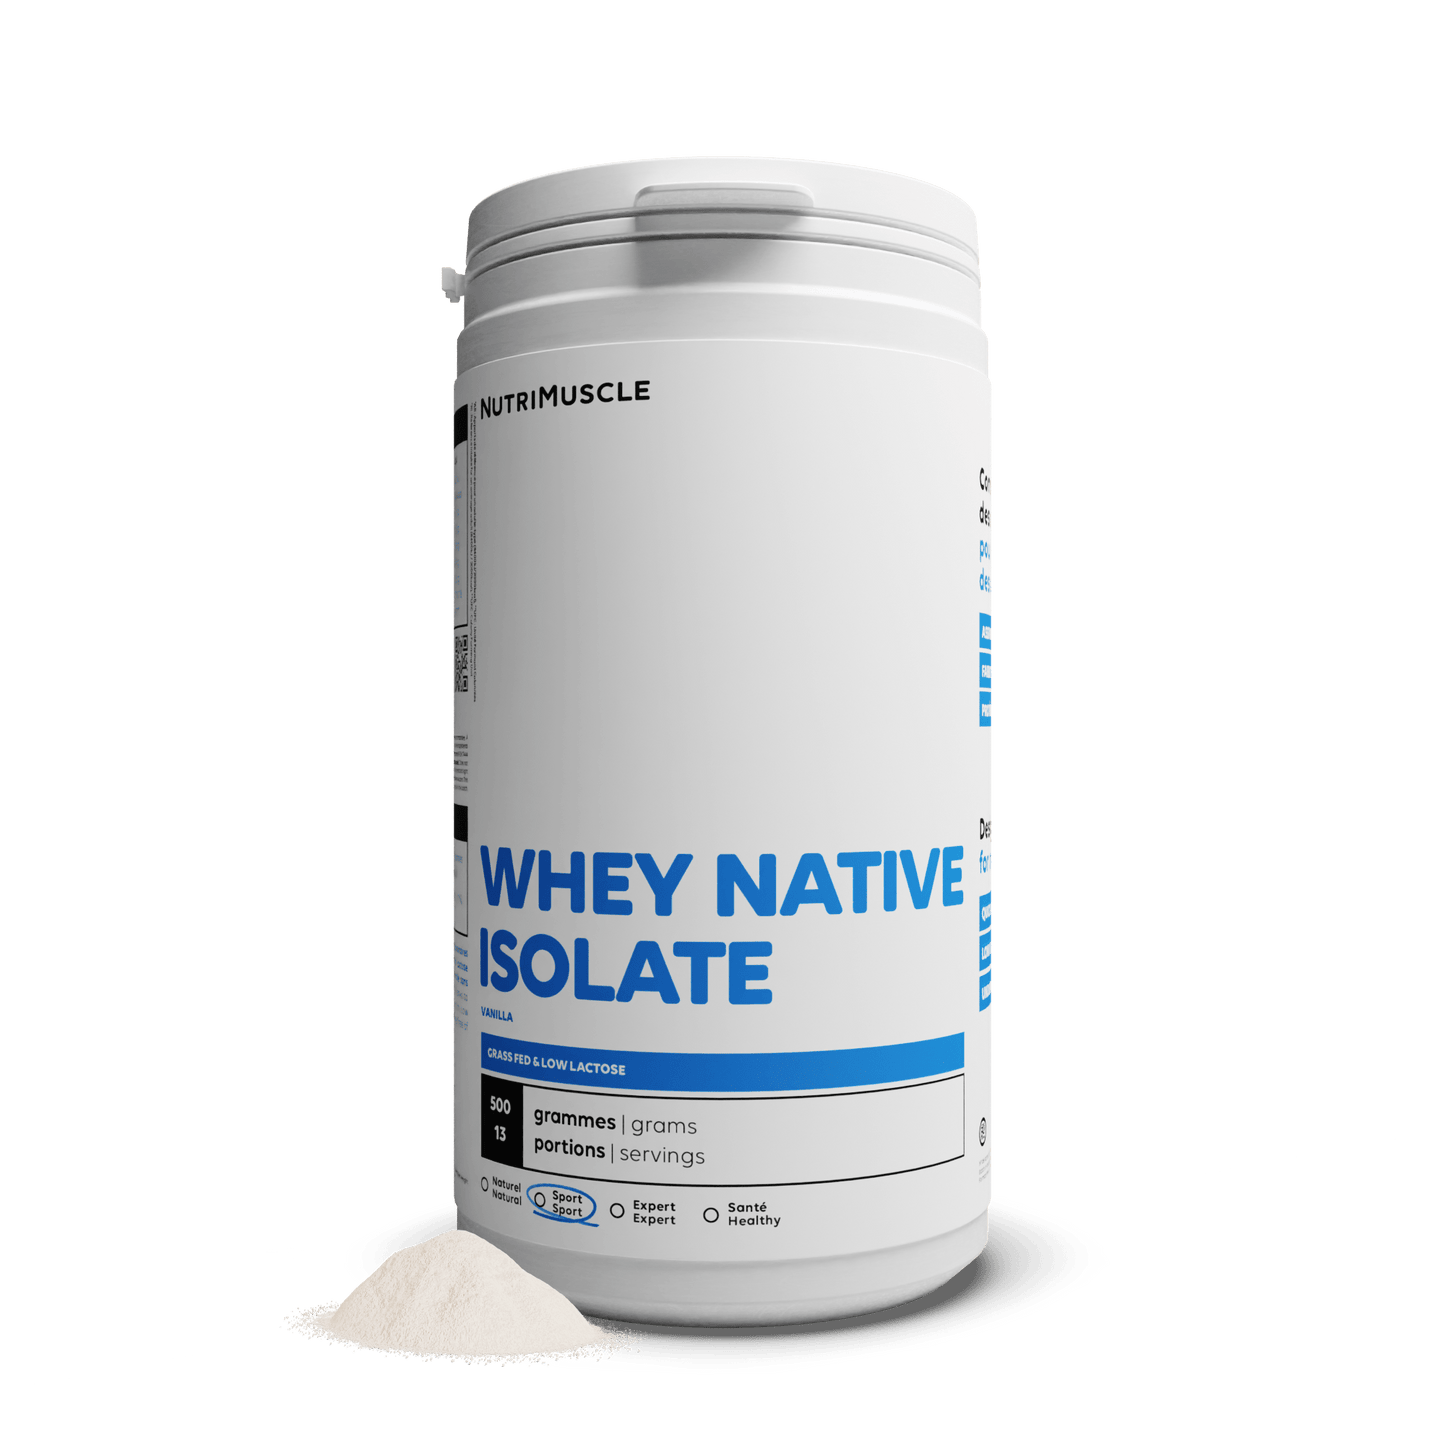 Nutrimuscle Protéines Vanille / 500 g Whey Native Isolate (Low lactose)